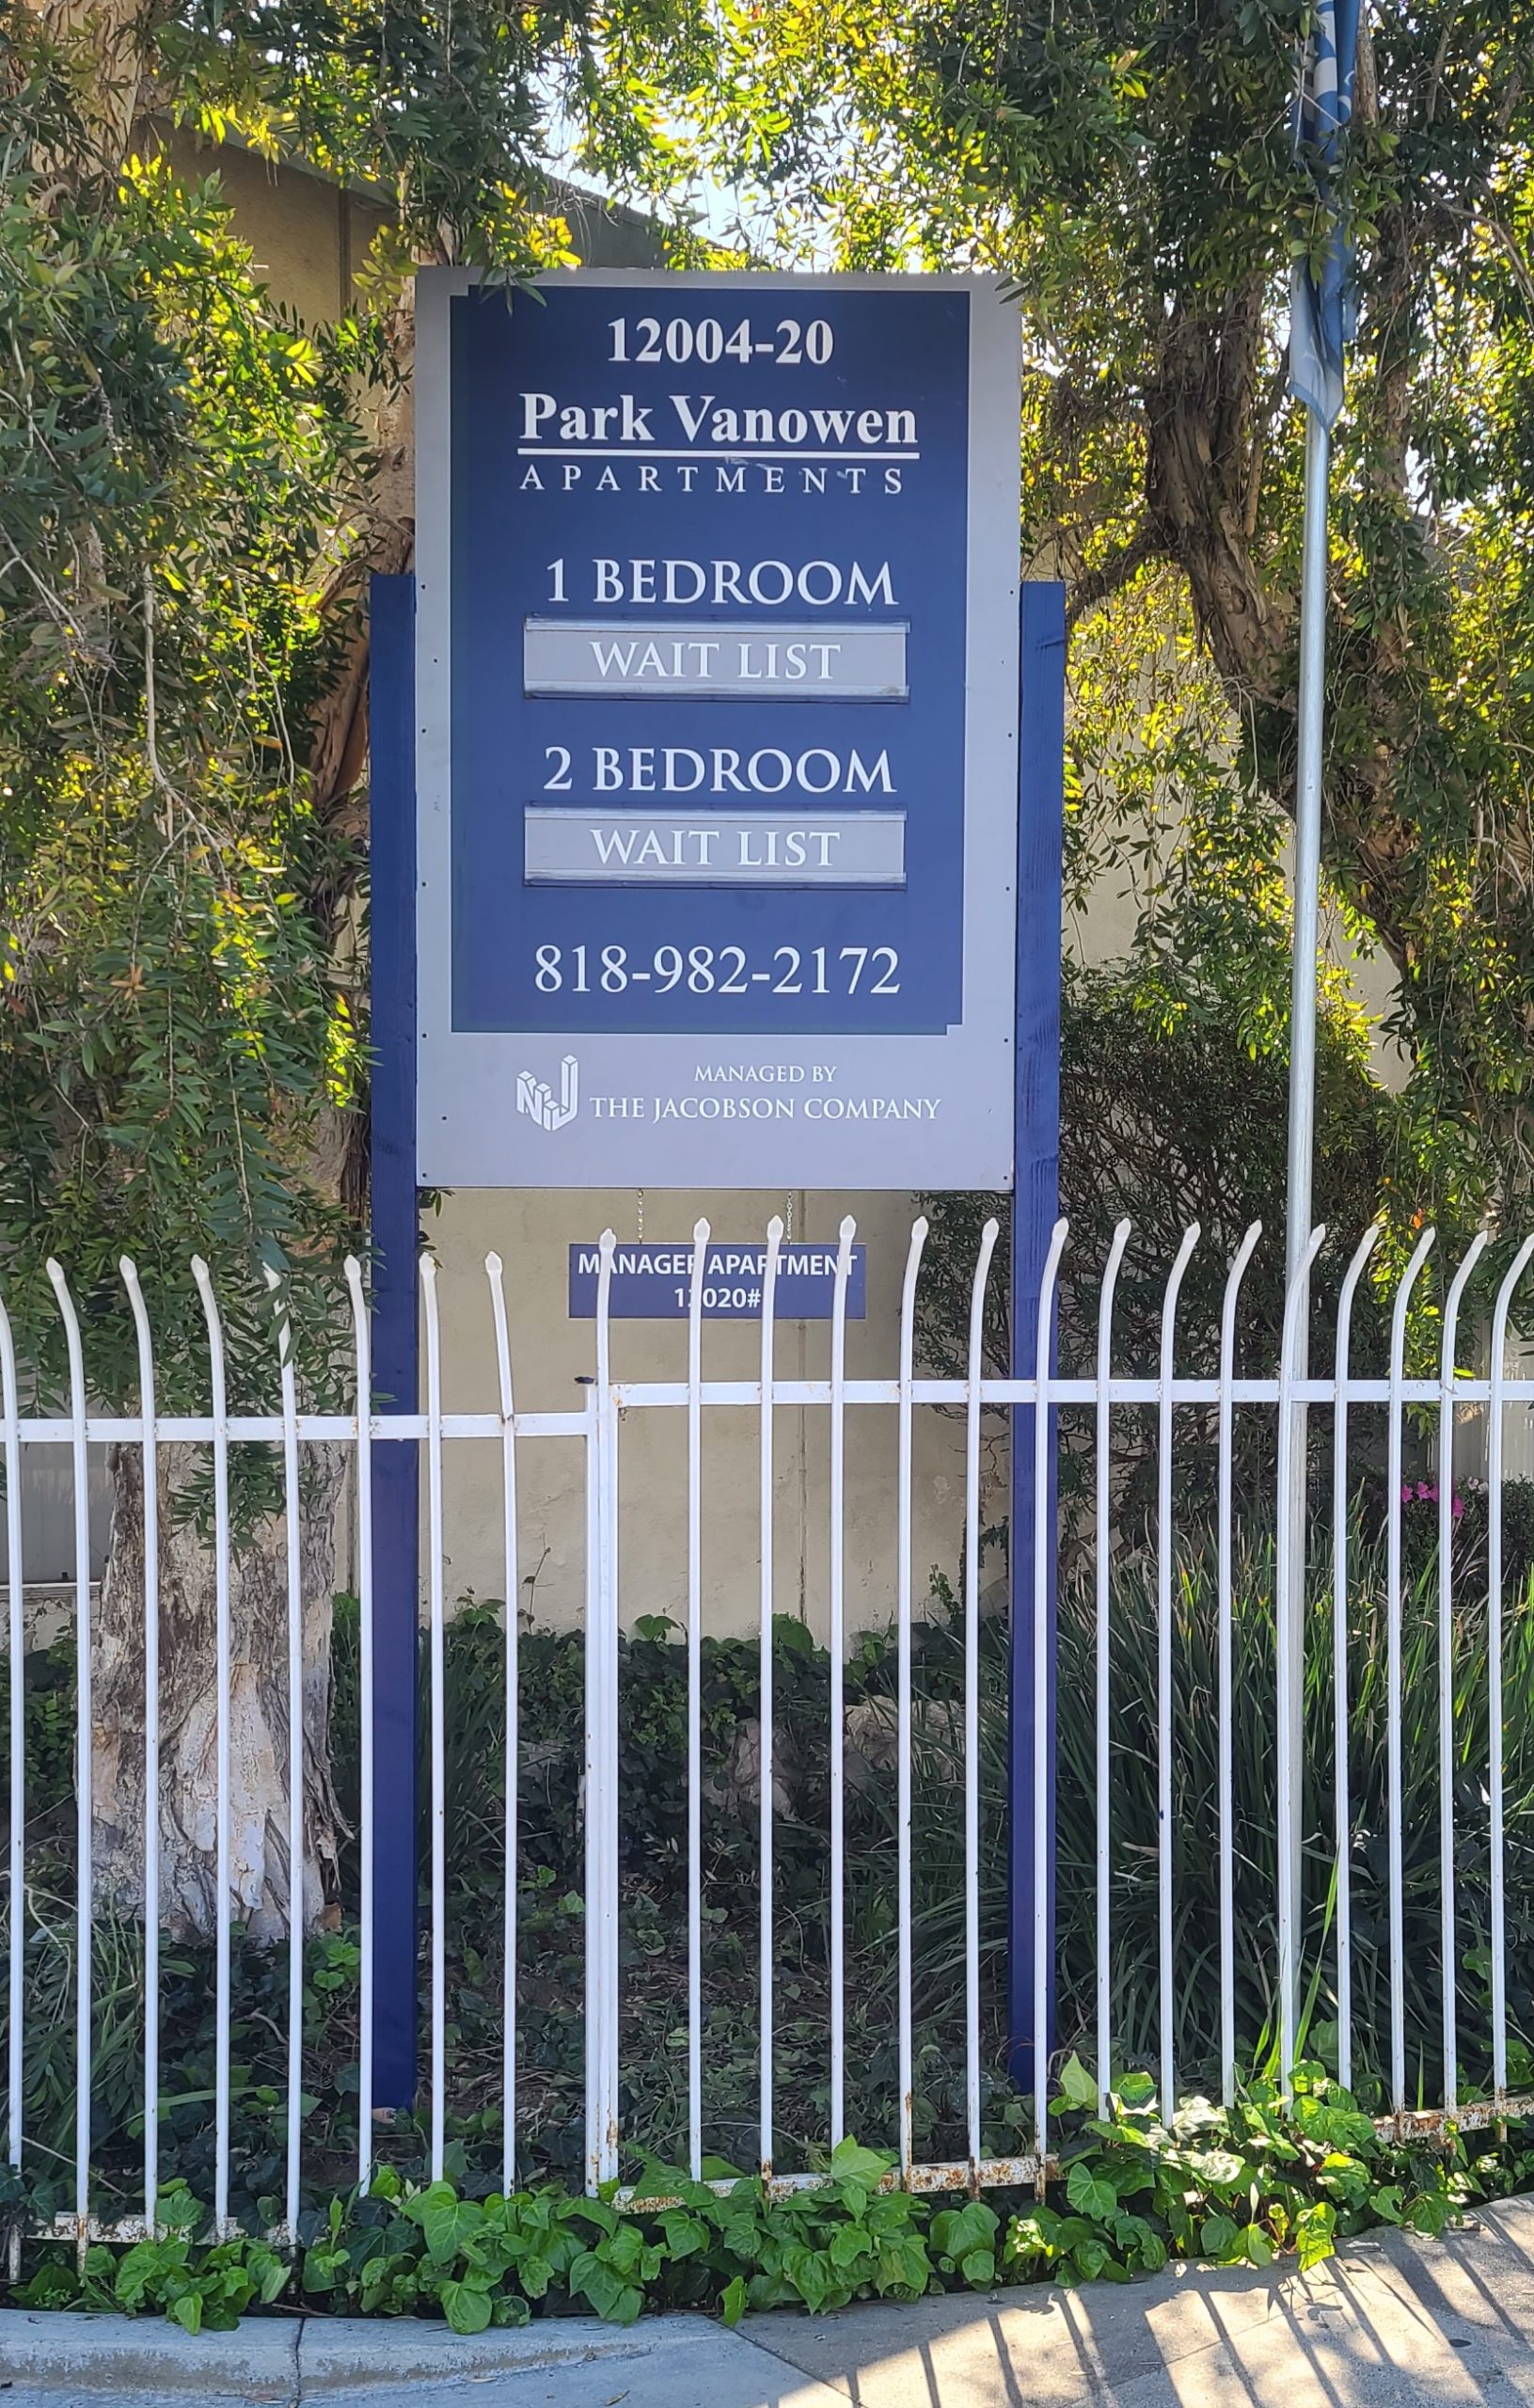 With this post and panel real estate sign Jacobson's North Hollywood Park Vanowen Apartments will be more visible and display info regarding unit availability.